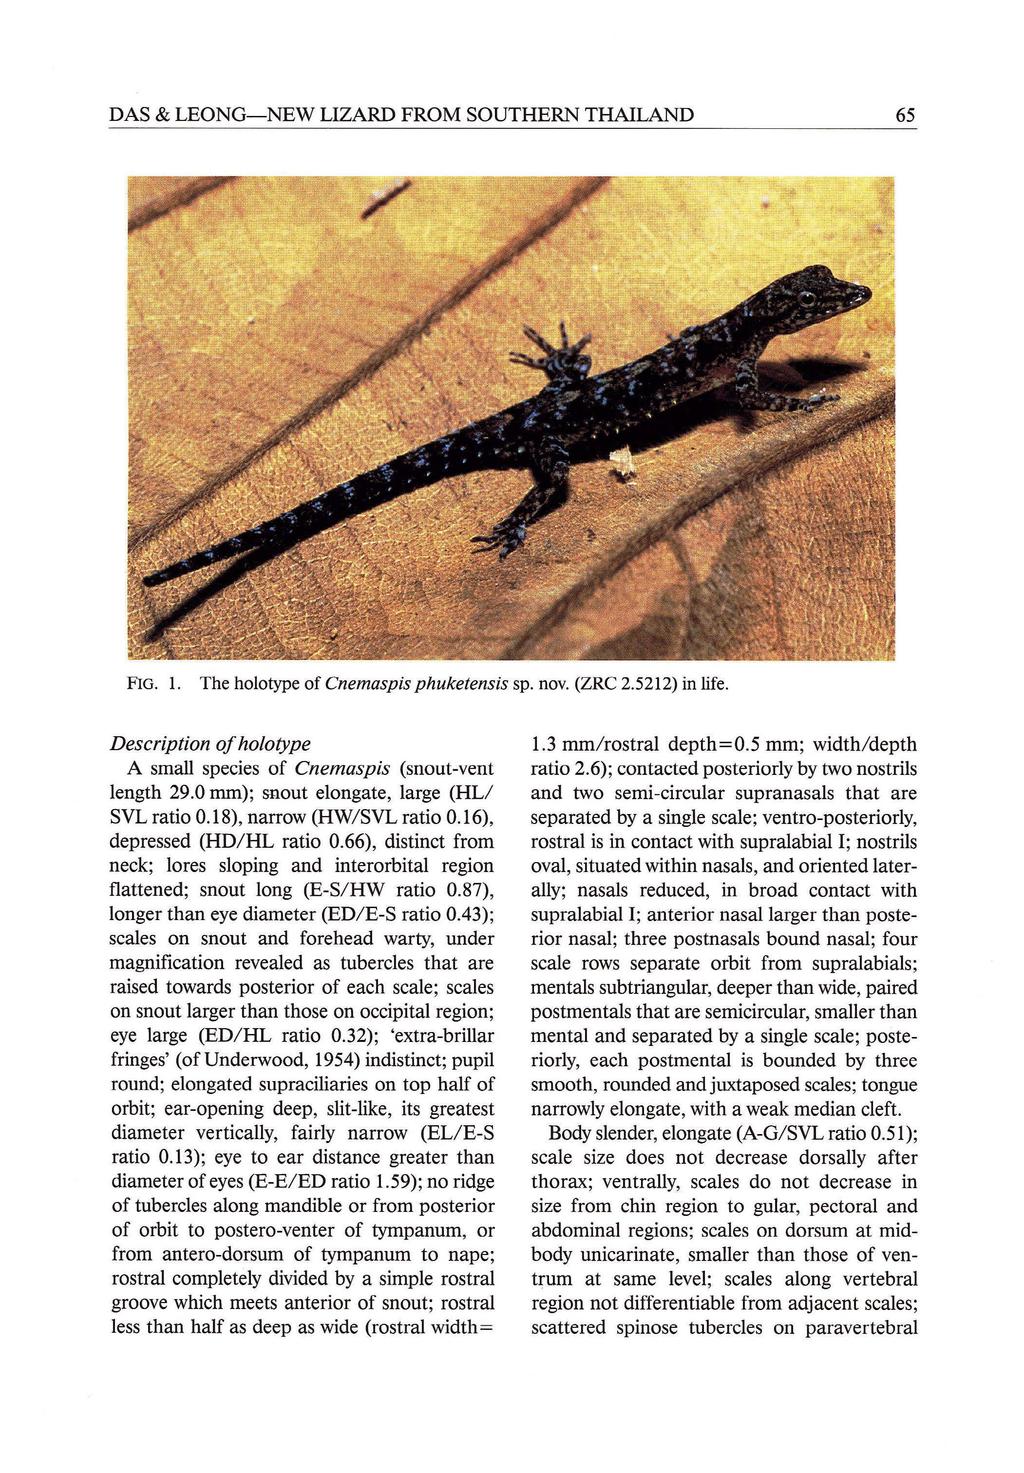 DAS & LEONG-NEW FIG. 1. LIZARD The holotype of Cnemaspis FROM SOUTHERN phuketensis Description of holotype A small species of Cnemaspis (snout-vent length 29.